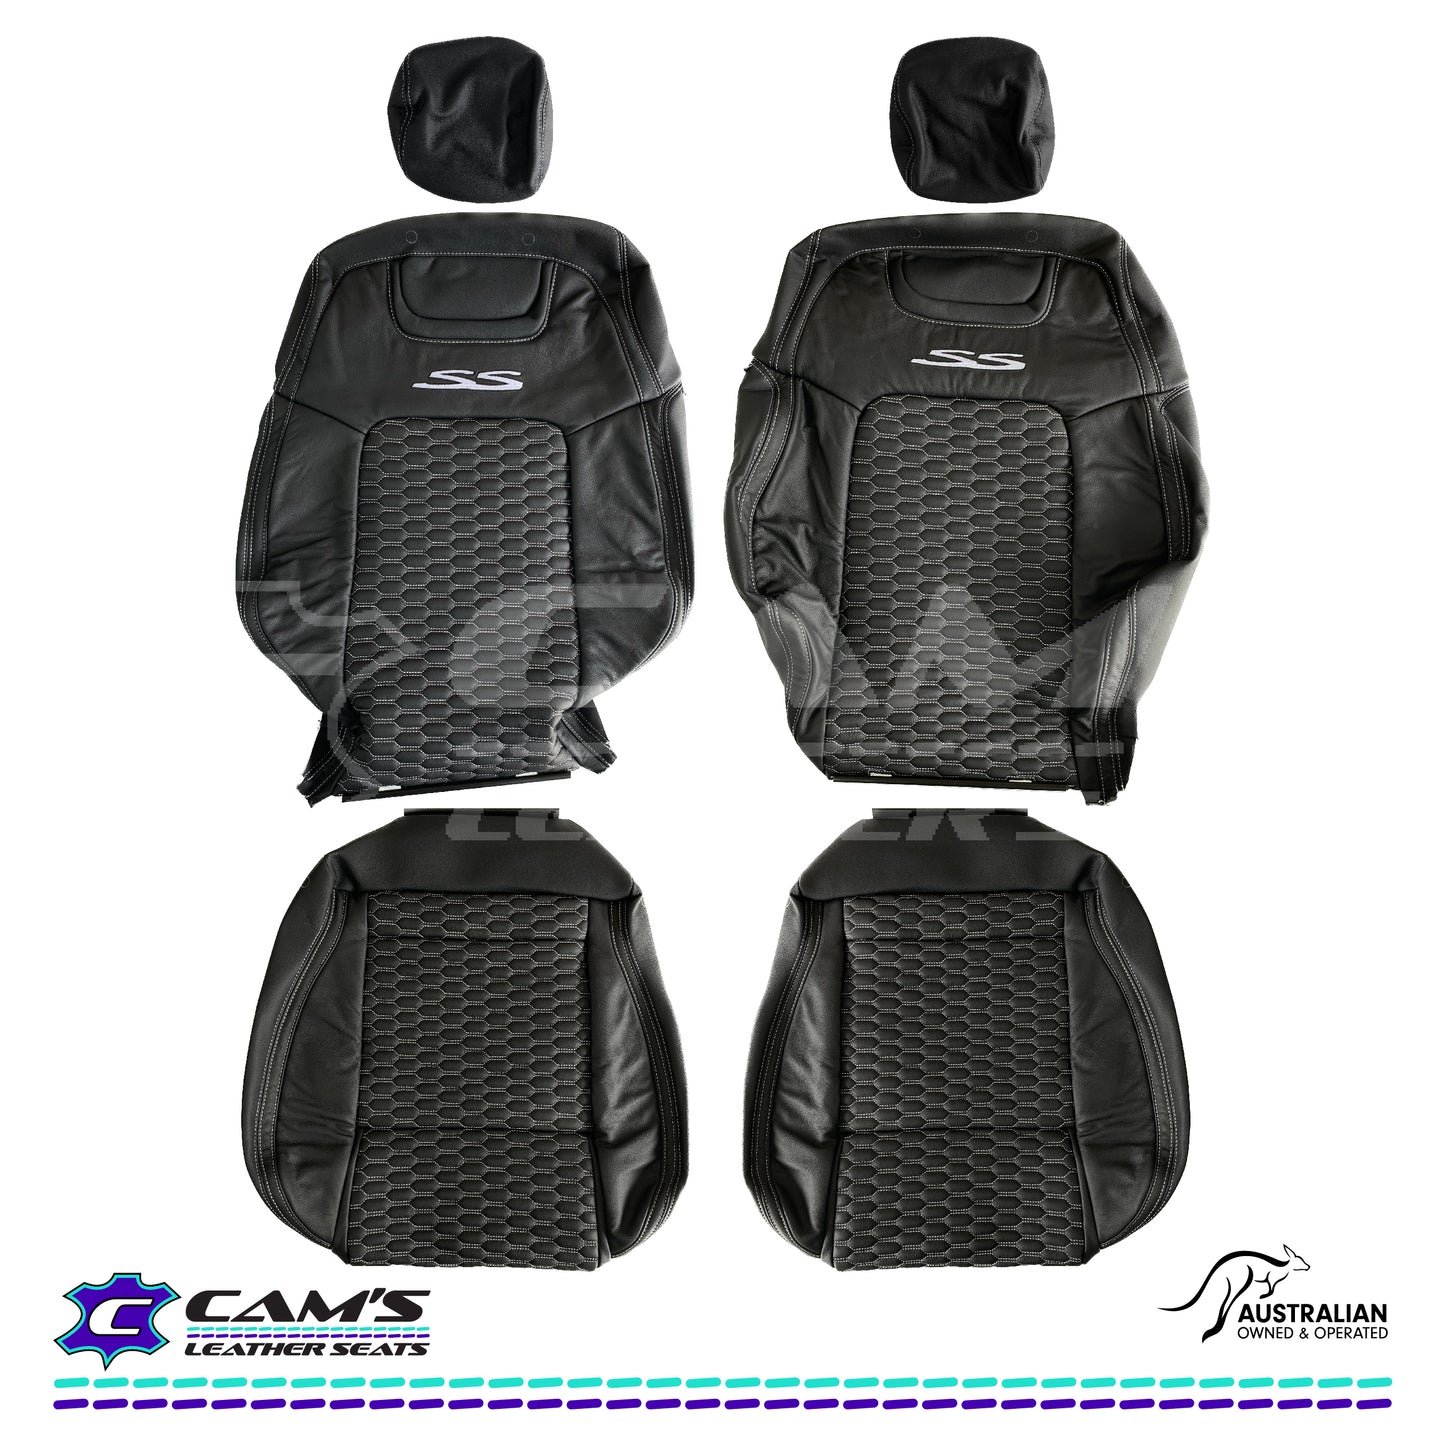 LEATHER SEATS TRIM KIT FOR VE SS 2 FRONT SEATS OR UTE ONYX & SILVER HEXAGON